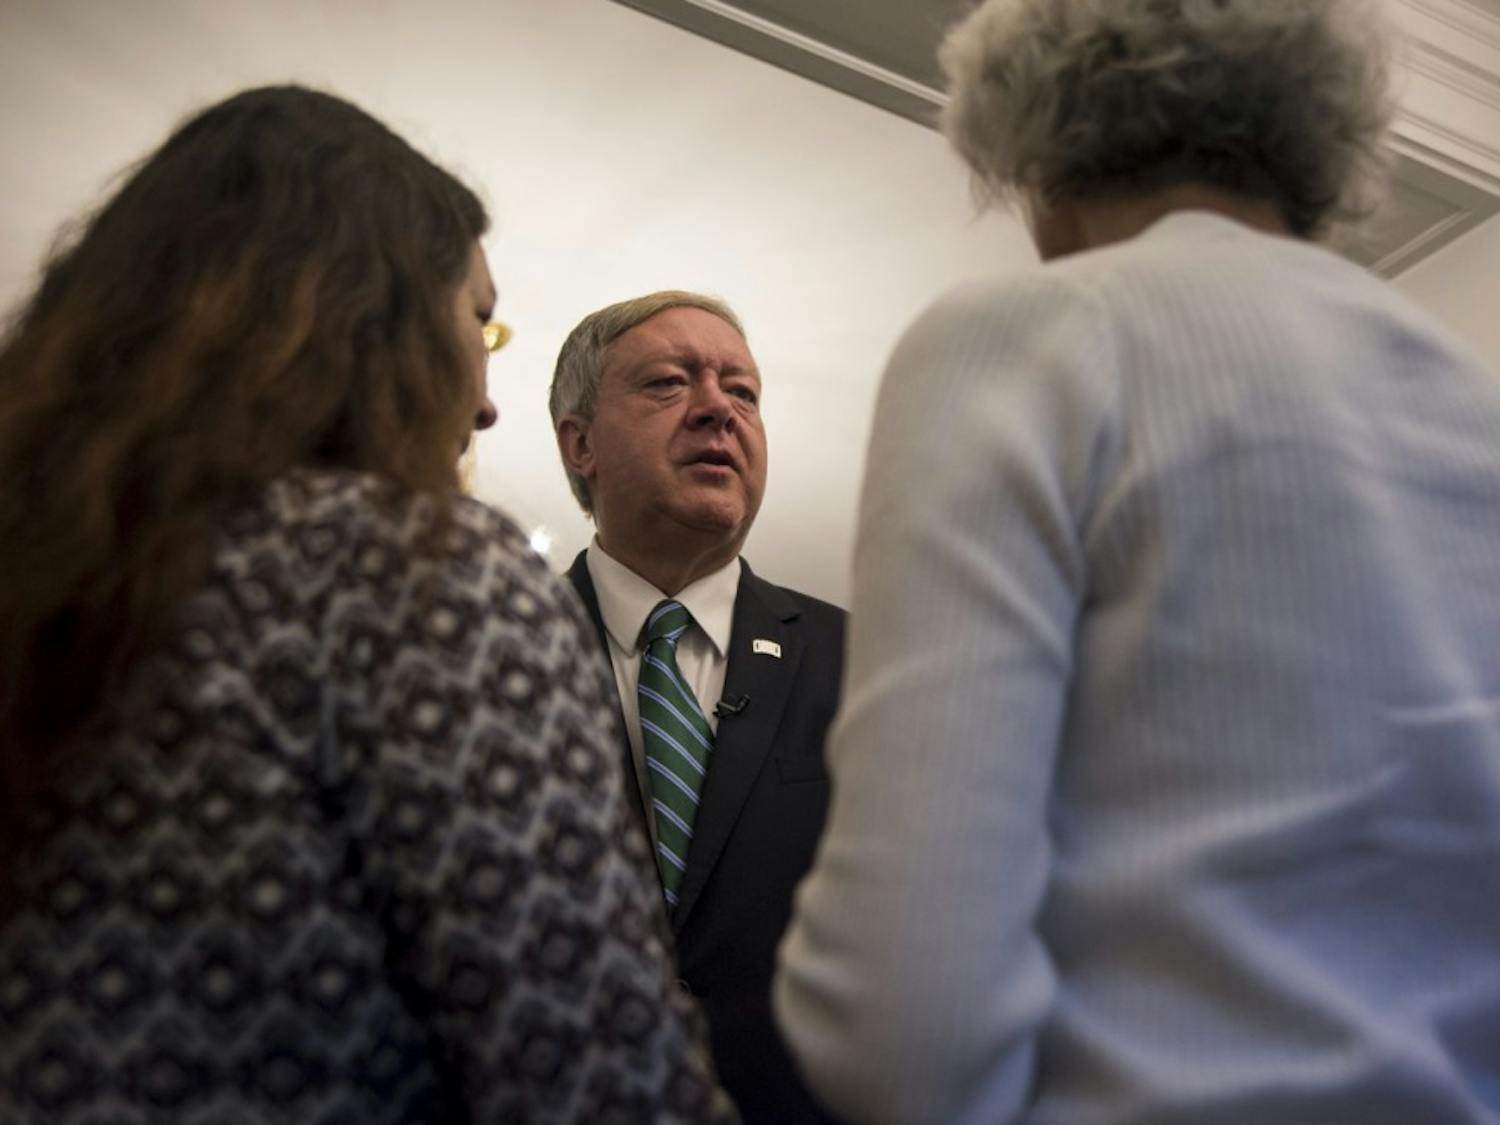 Duane Nellis speaks with Athens residents during breakfast in Cutler Hall on the morning of&nbsp;June 12.